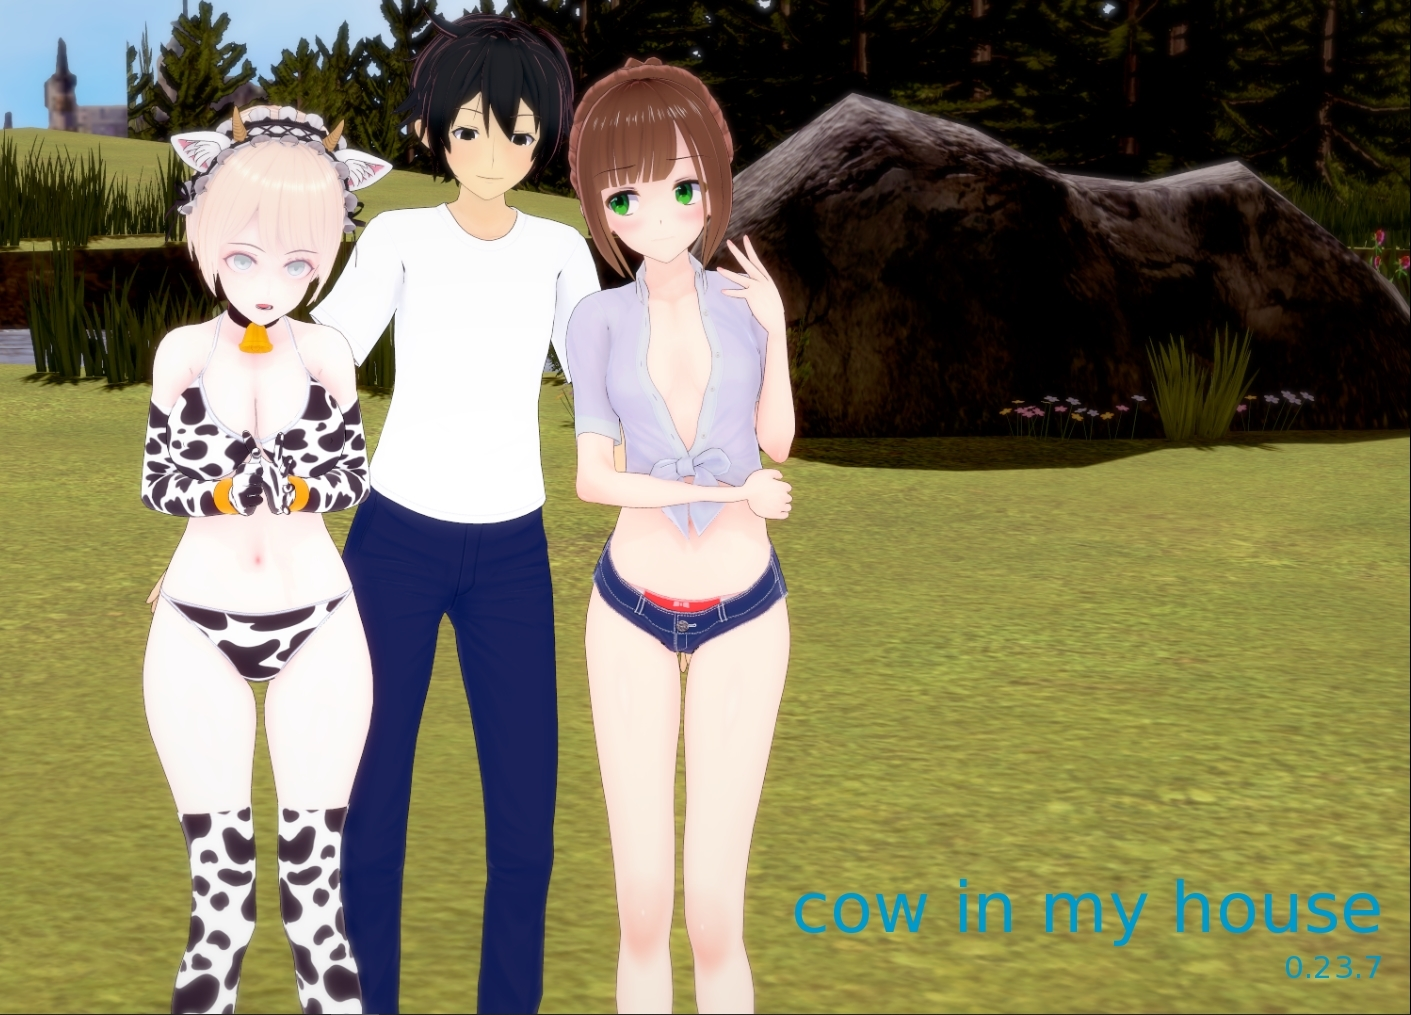 Cow In My House [v0.23.7] main image